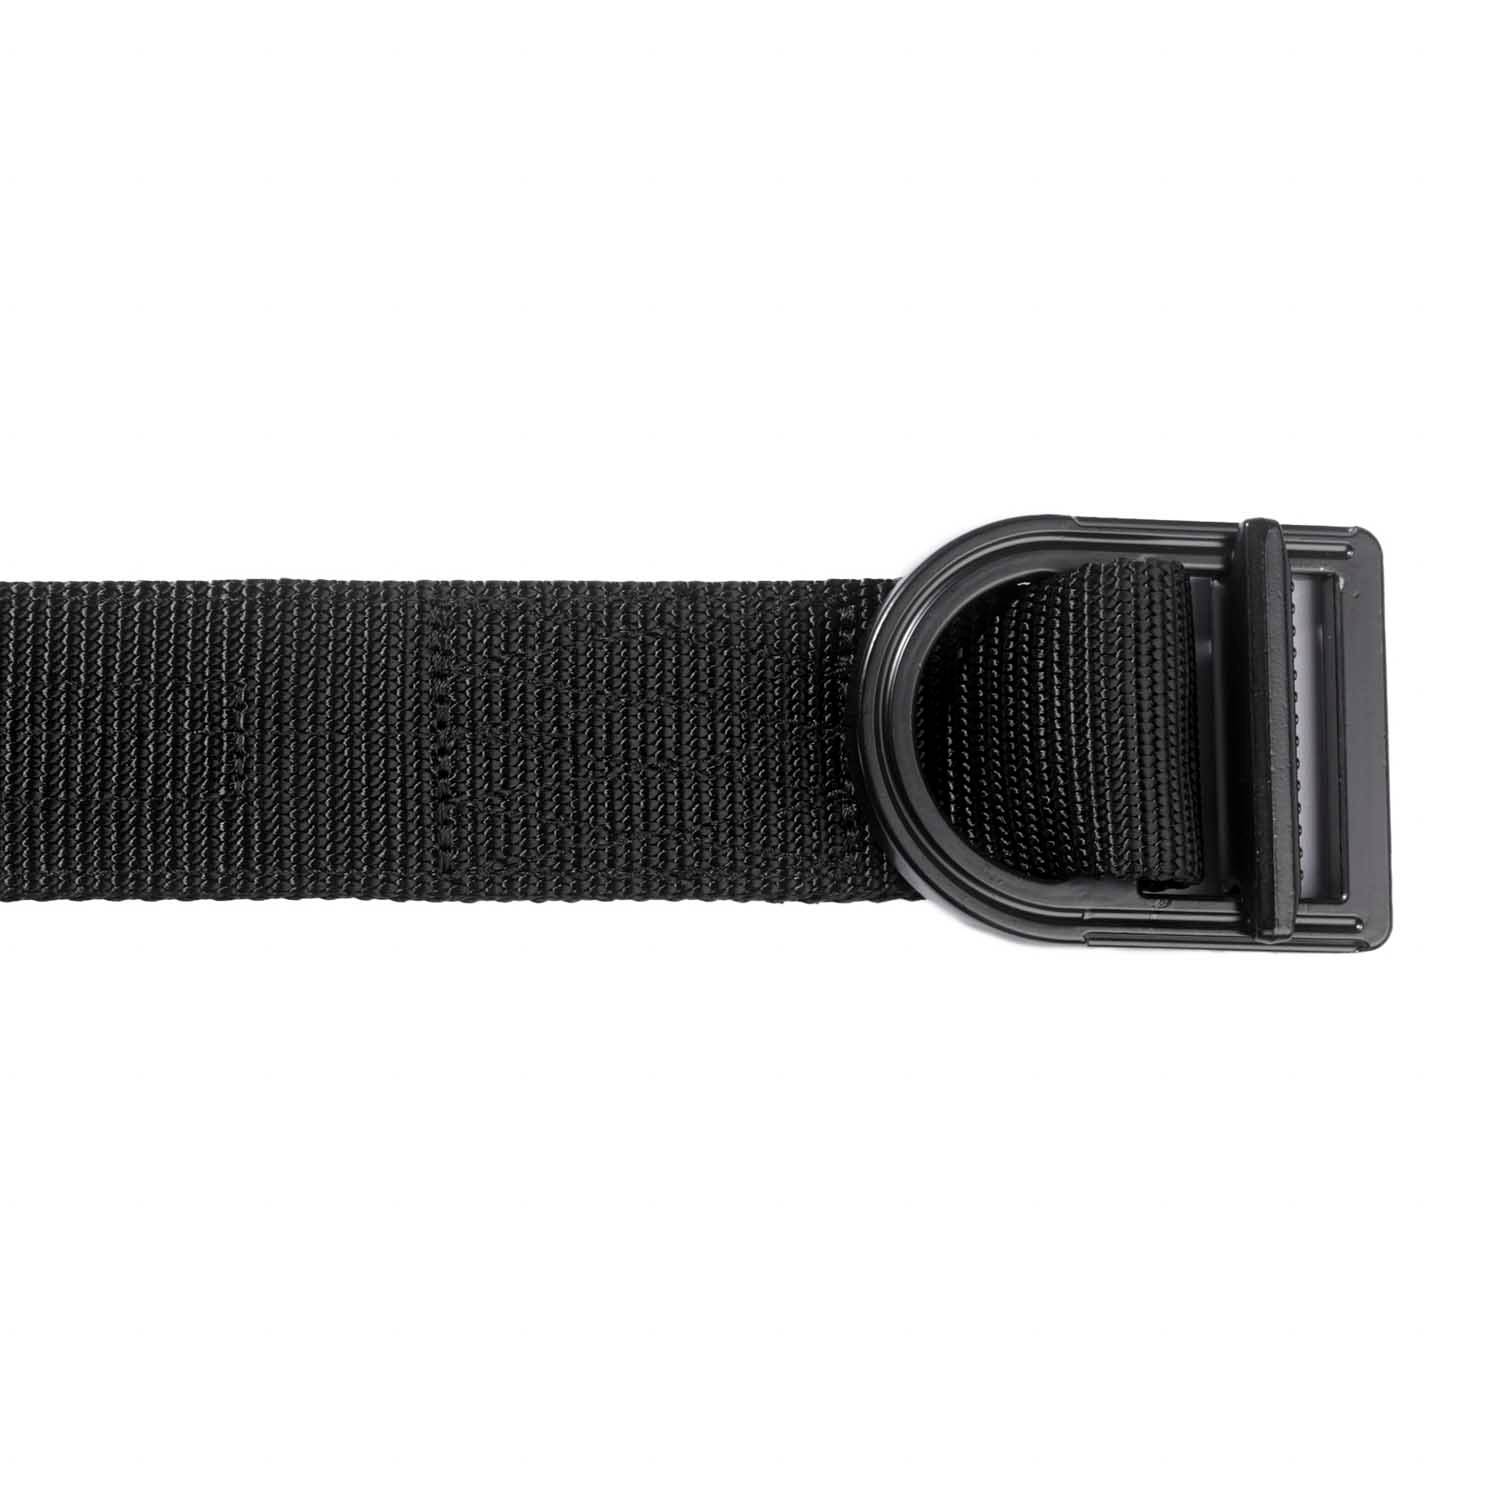 Police Fire EMS Tactical Nylon Duty Belt 1 1/2 inches wide Size XL 46' 54" 